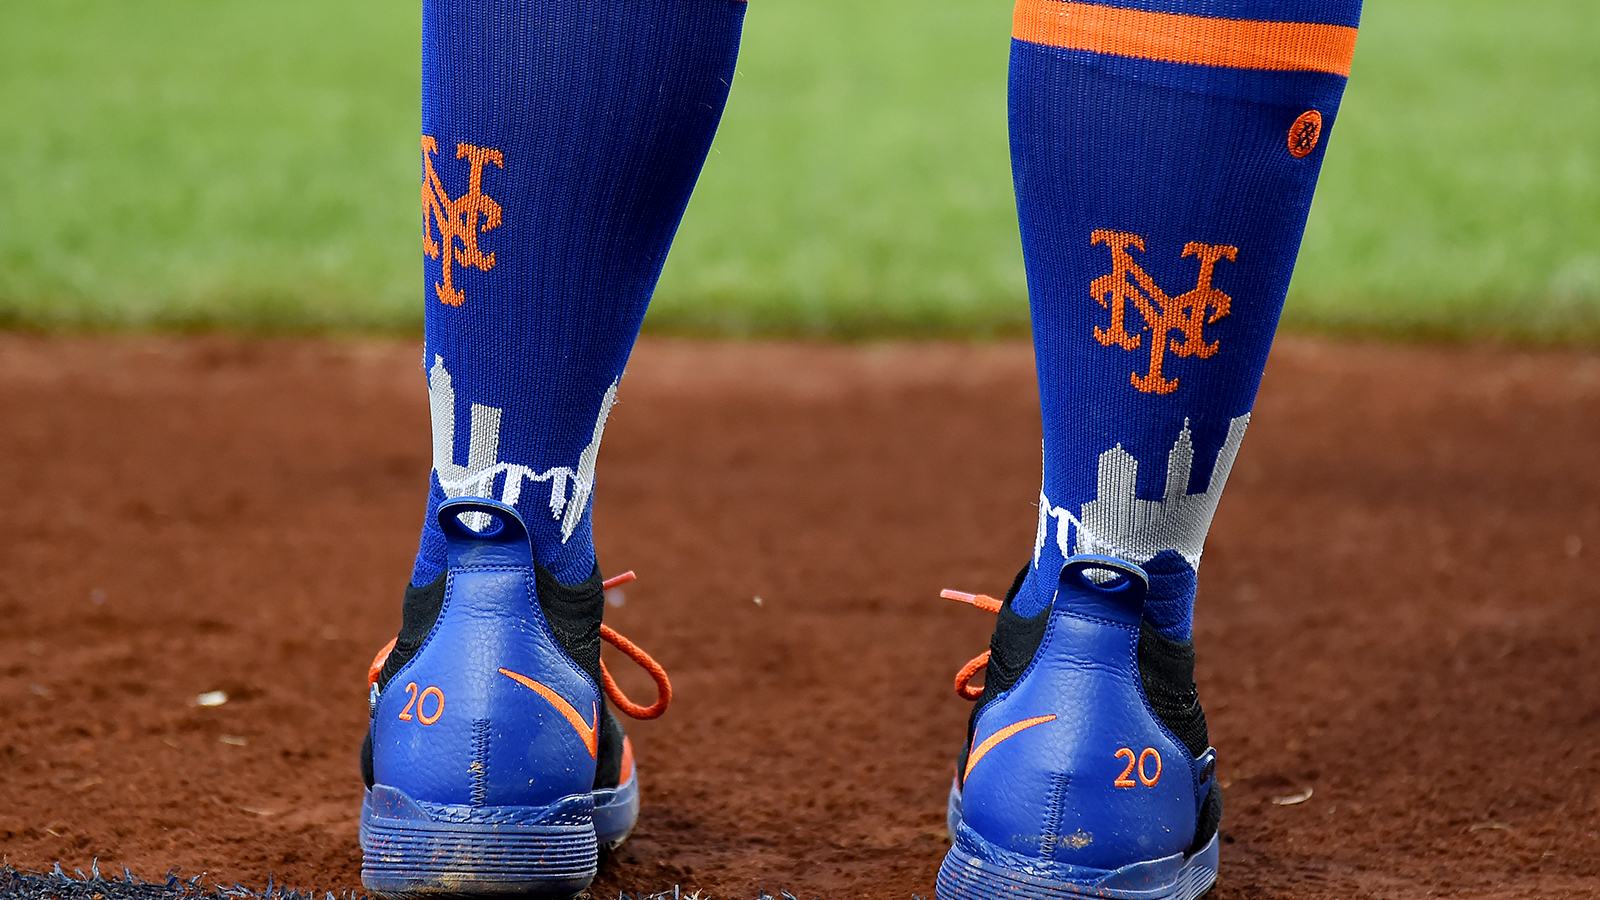 The 'Shoe Polish' Incident That Helped Mets Win A World Series